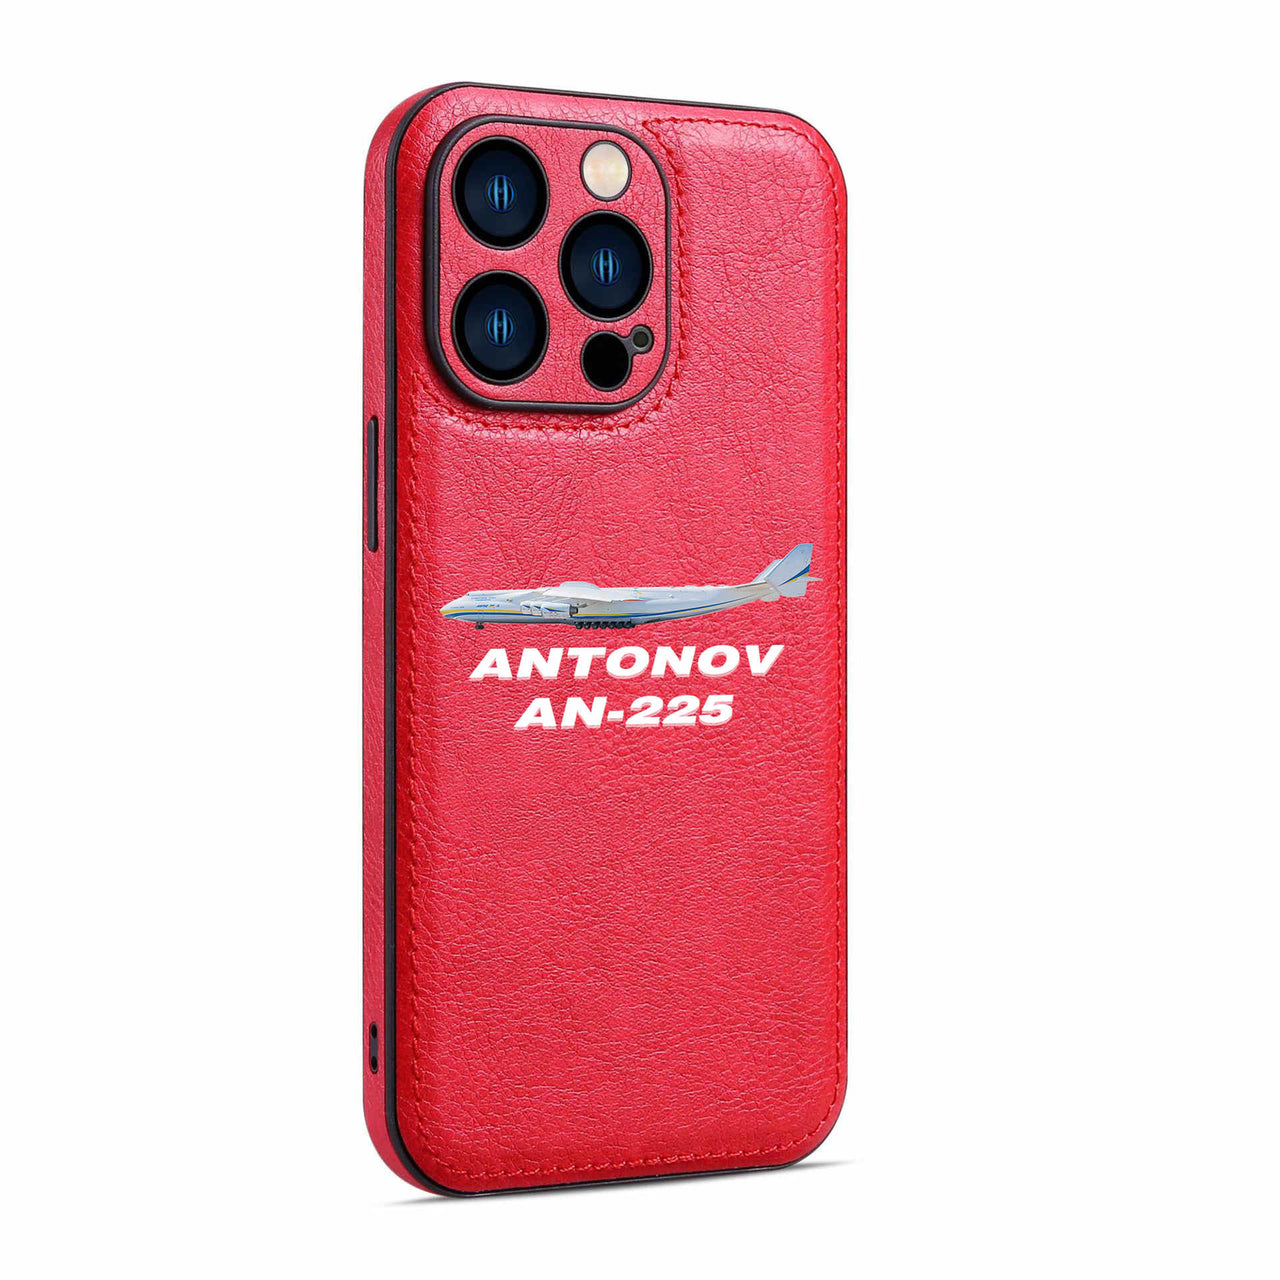 The Antonov AN-225 Designed Leather iPhone Cases